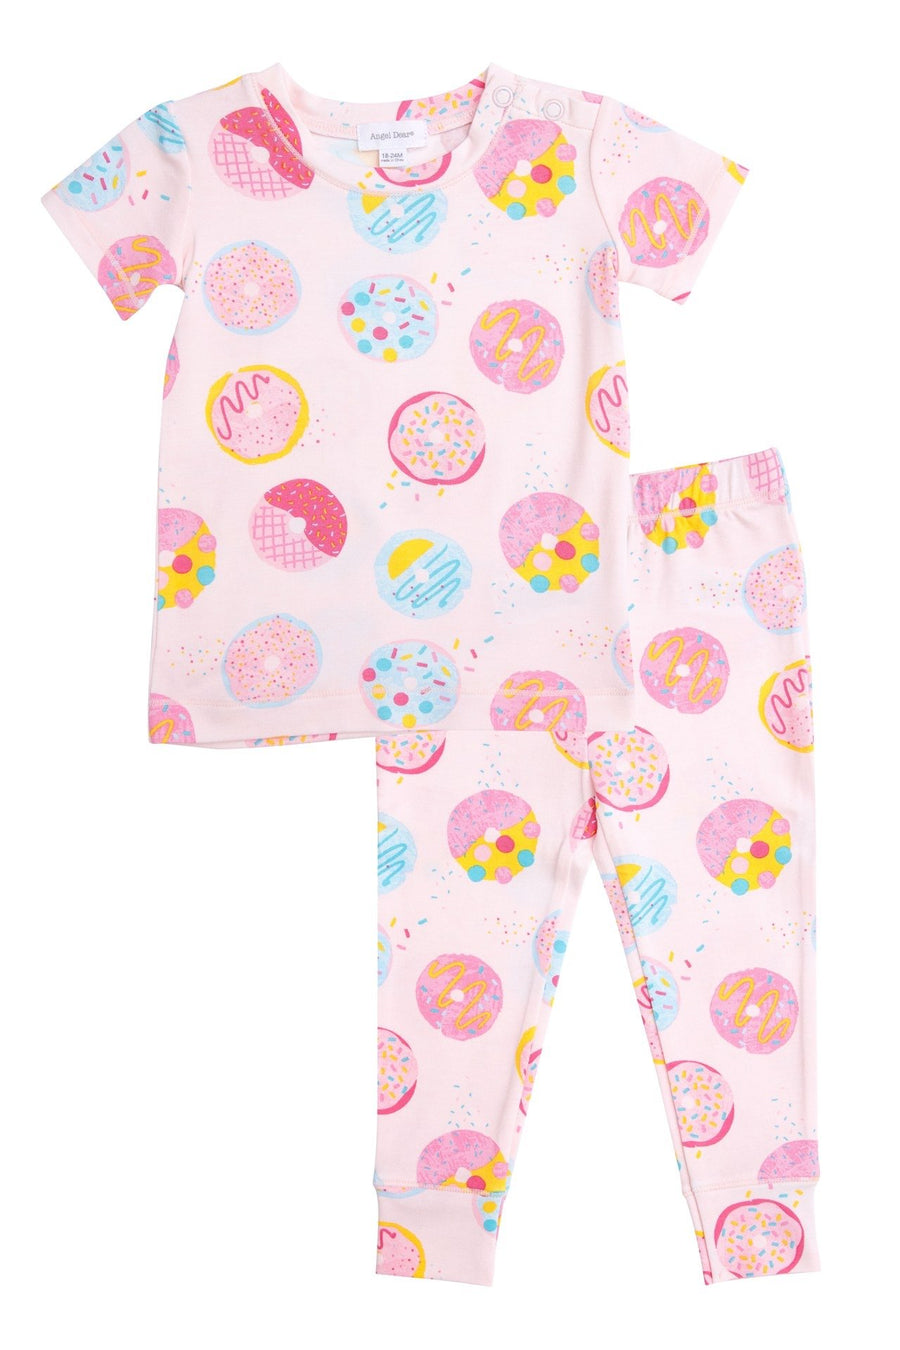 donuts Bamboo Pajama - Pink and Brown Boutique